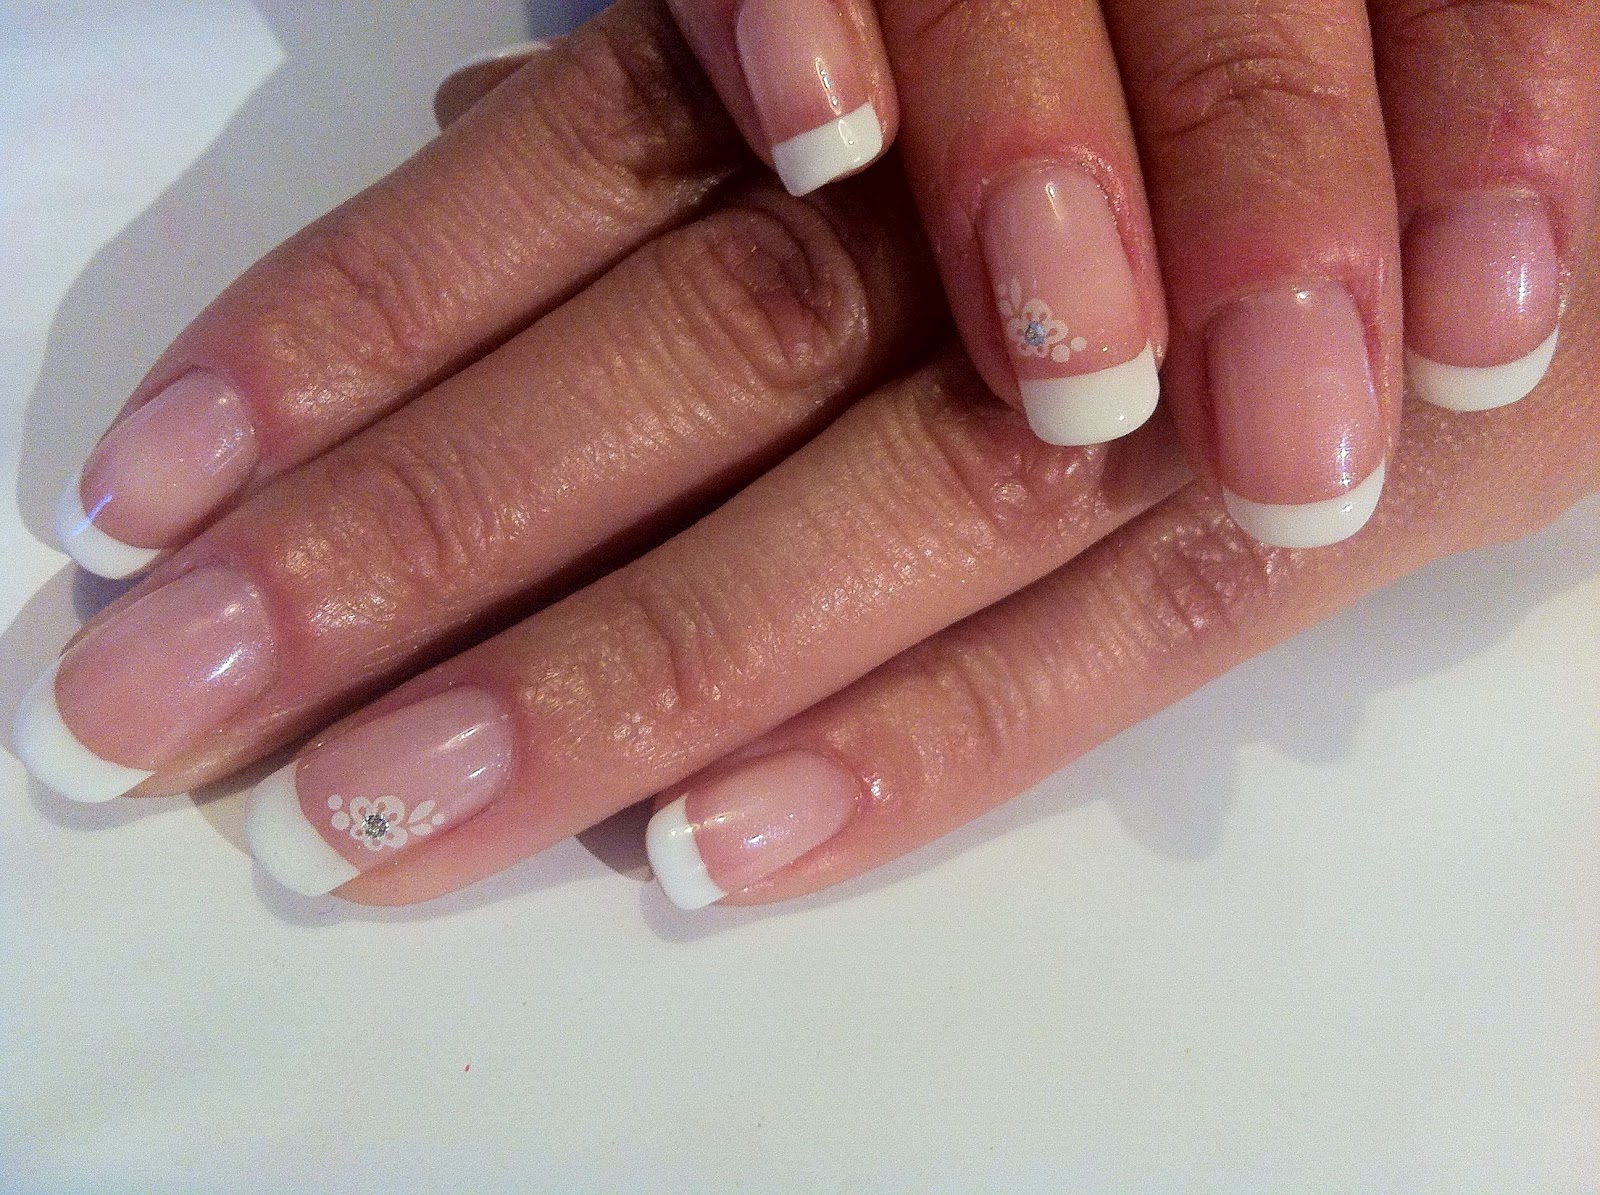 6. CND Shellac Nail Art Tutorial: French Manicure - wide 2